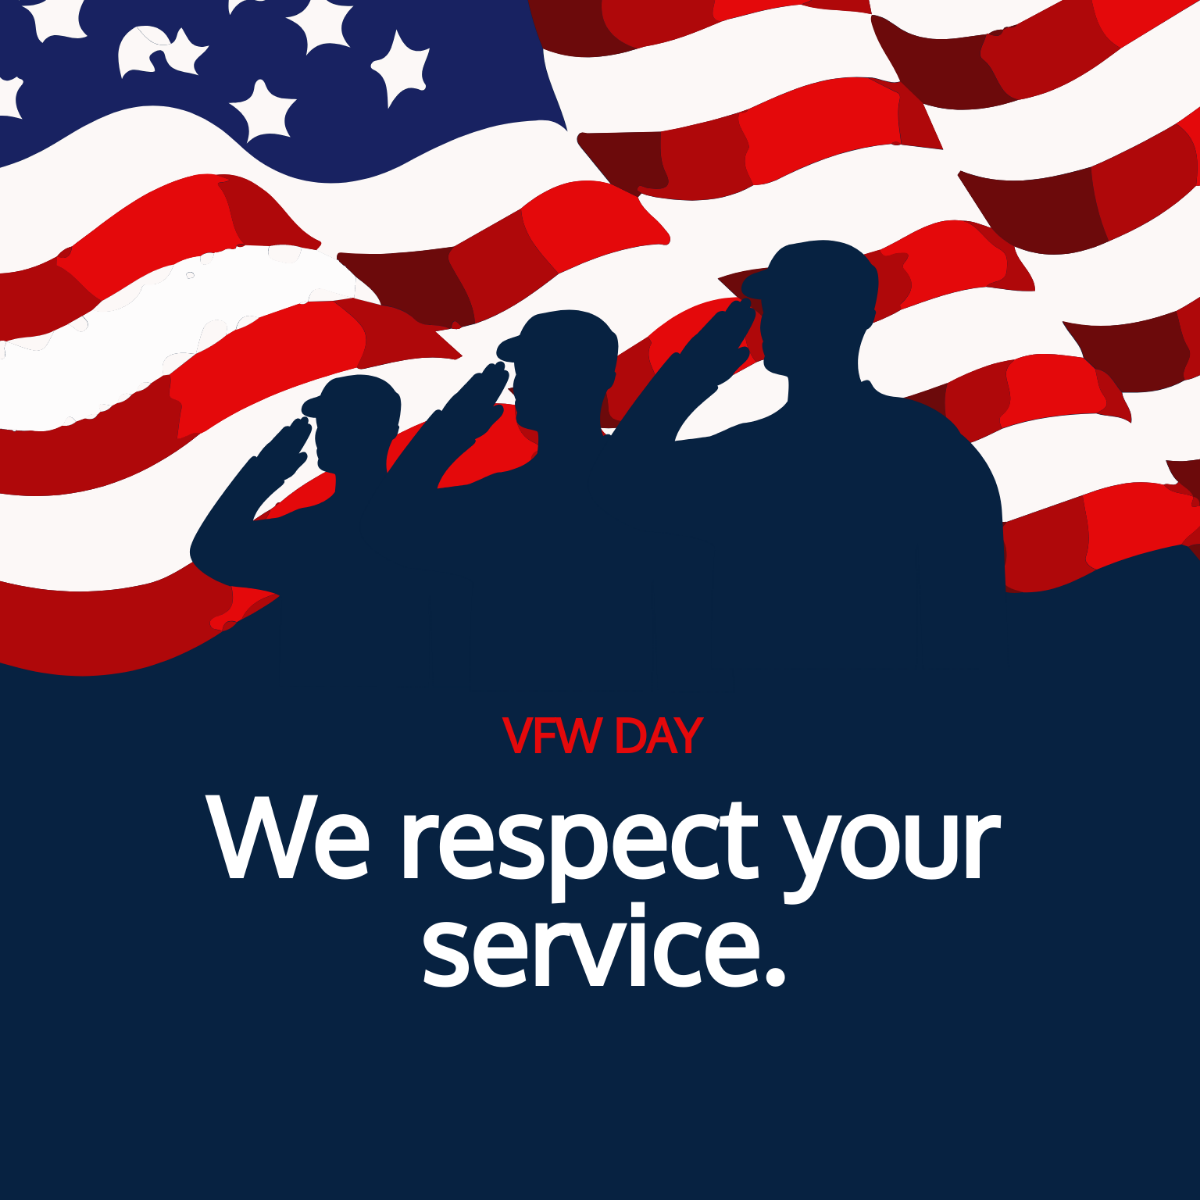 Free VFW Day Poster Vector Template